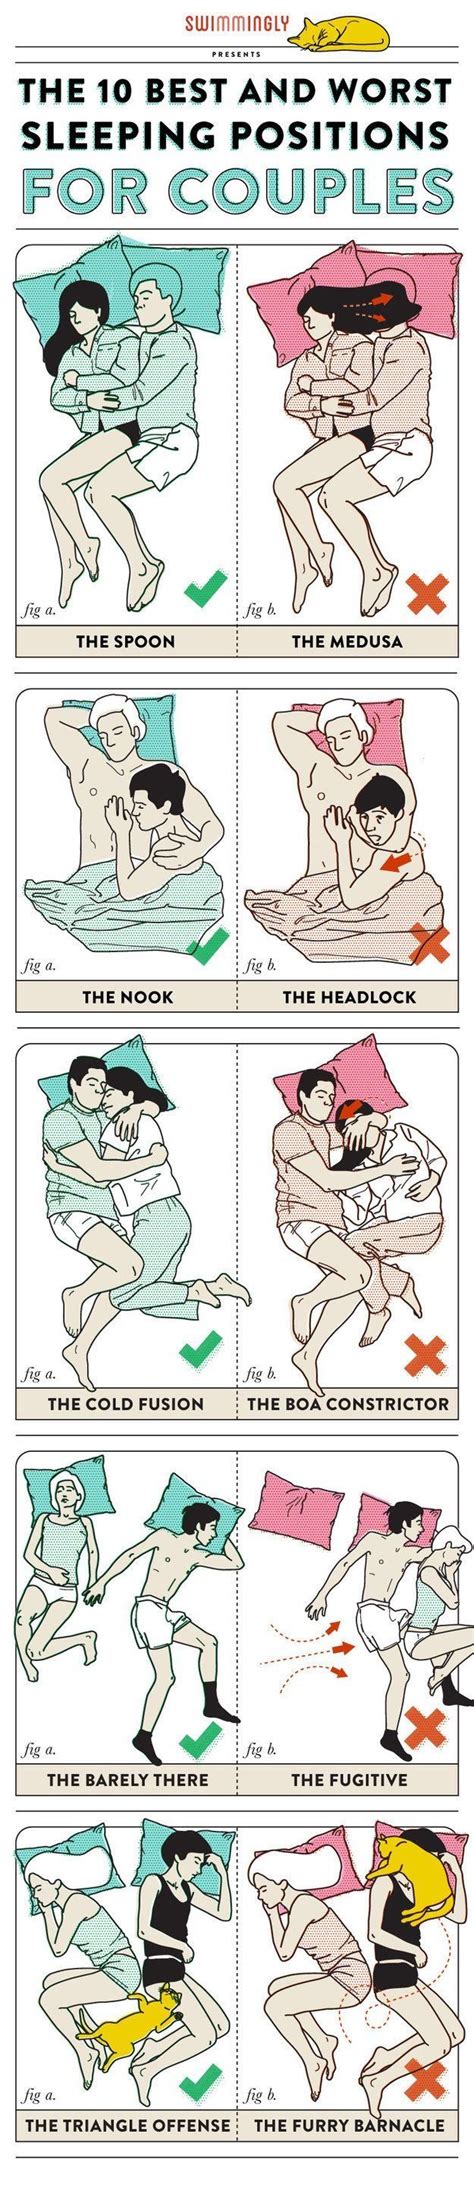 the best and worst sleeping positions for couples